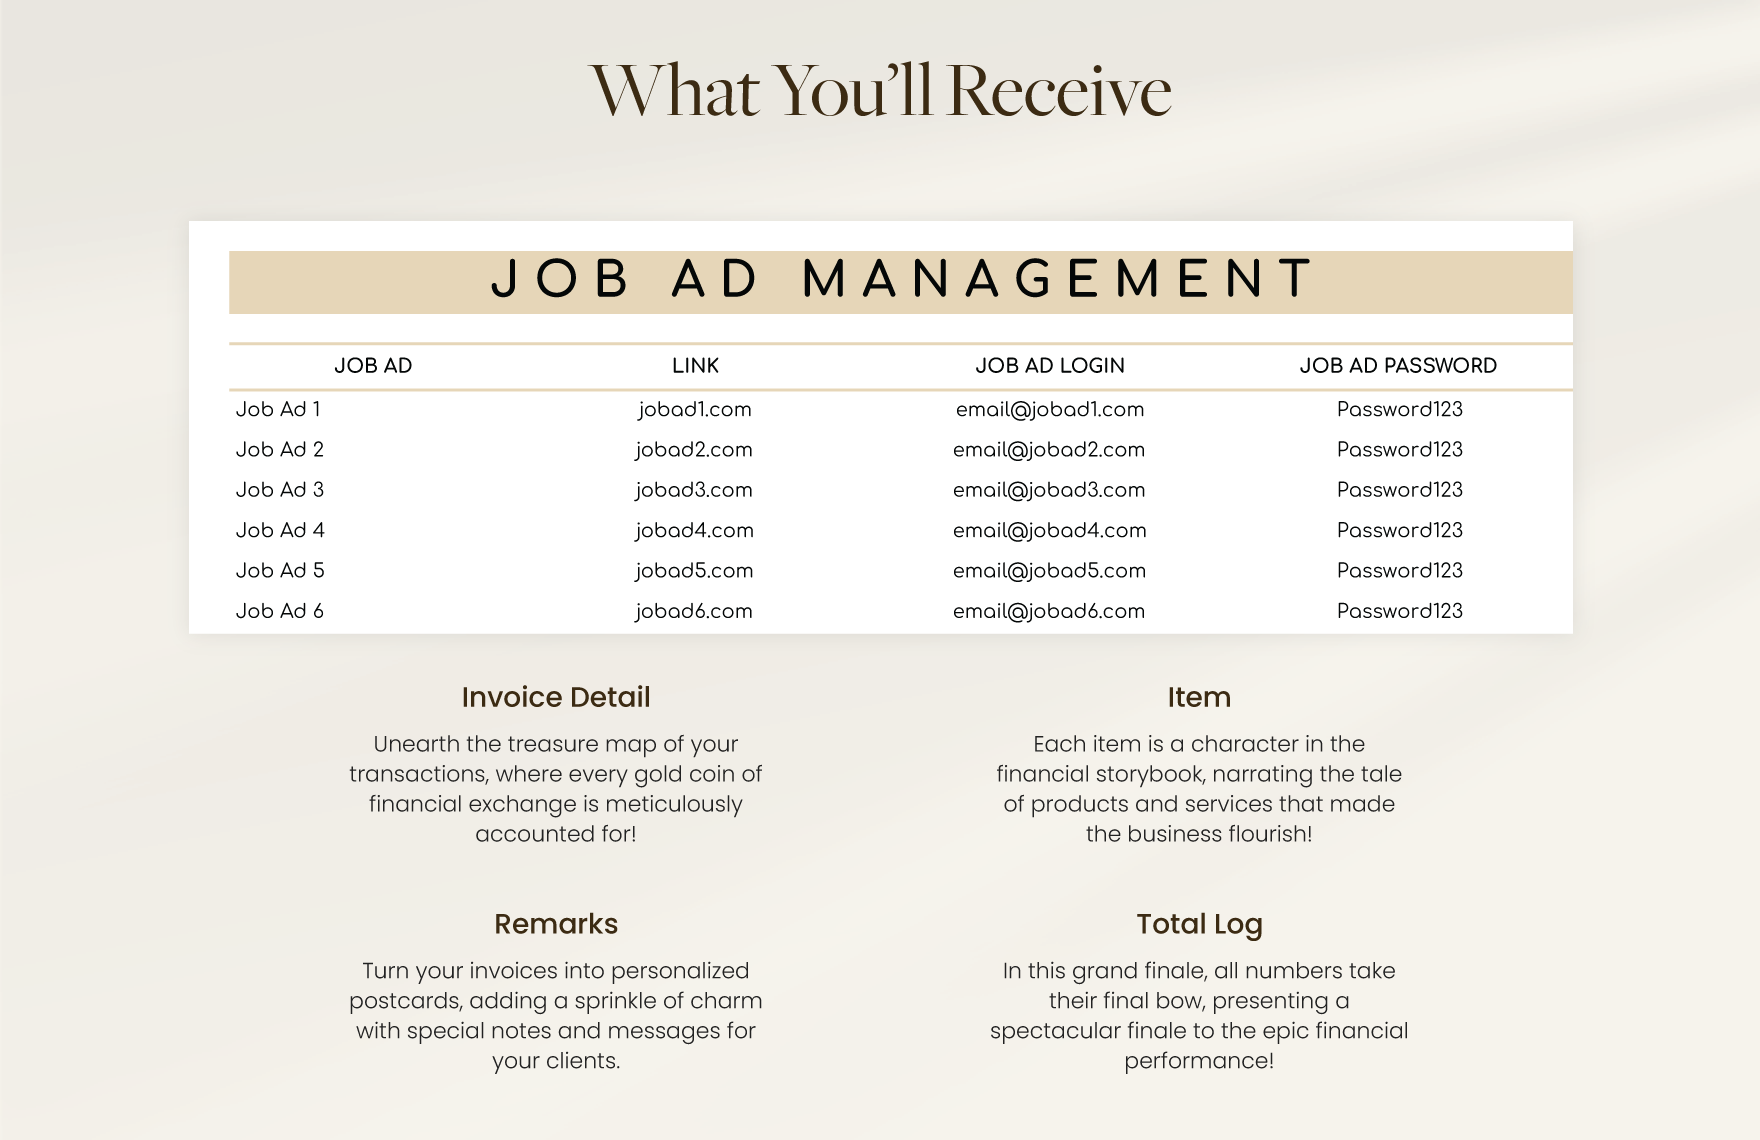 Job Ad Response Rate Tracker HR Template